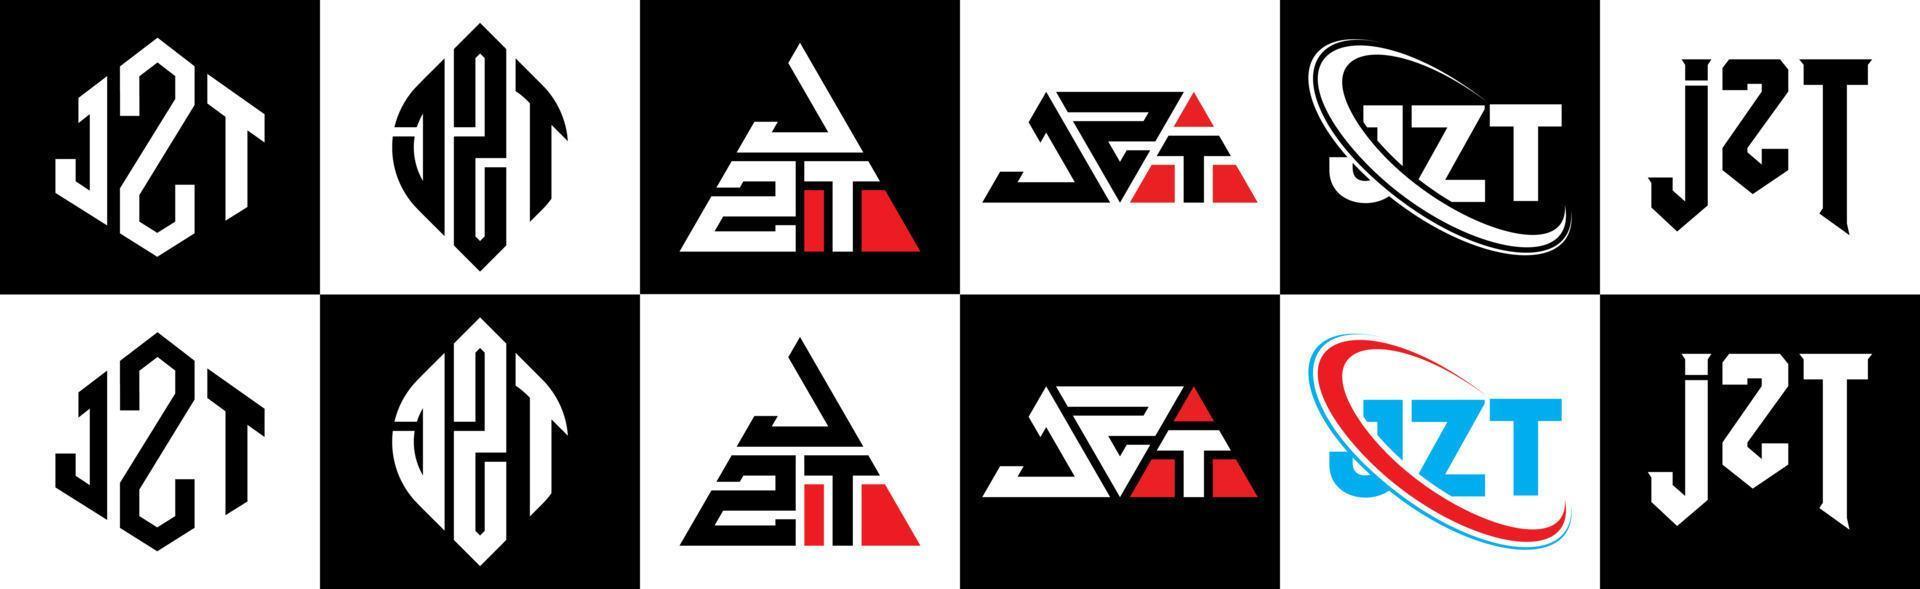 JZT letter logo design in six style. JZT polygon, circle, triangle, hexagon, flat and simple style with black and white color variation letter logo set in one artboard. JZT minimalist and classic logo vector